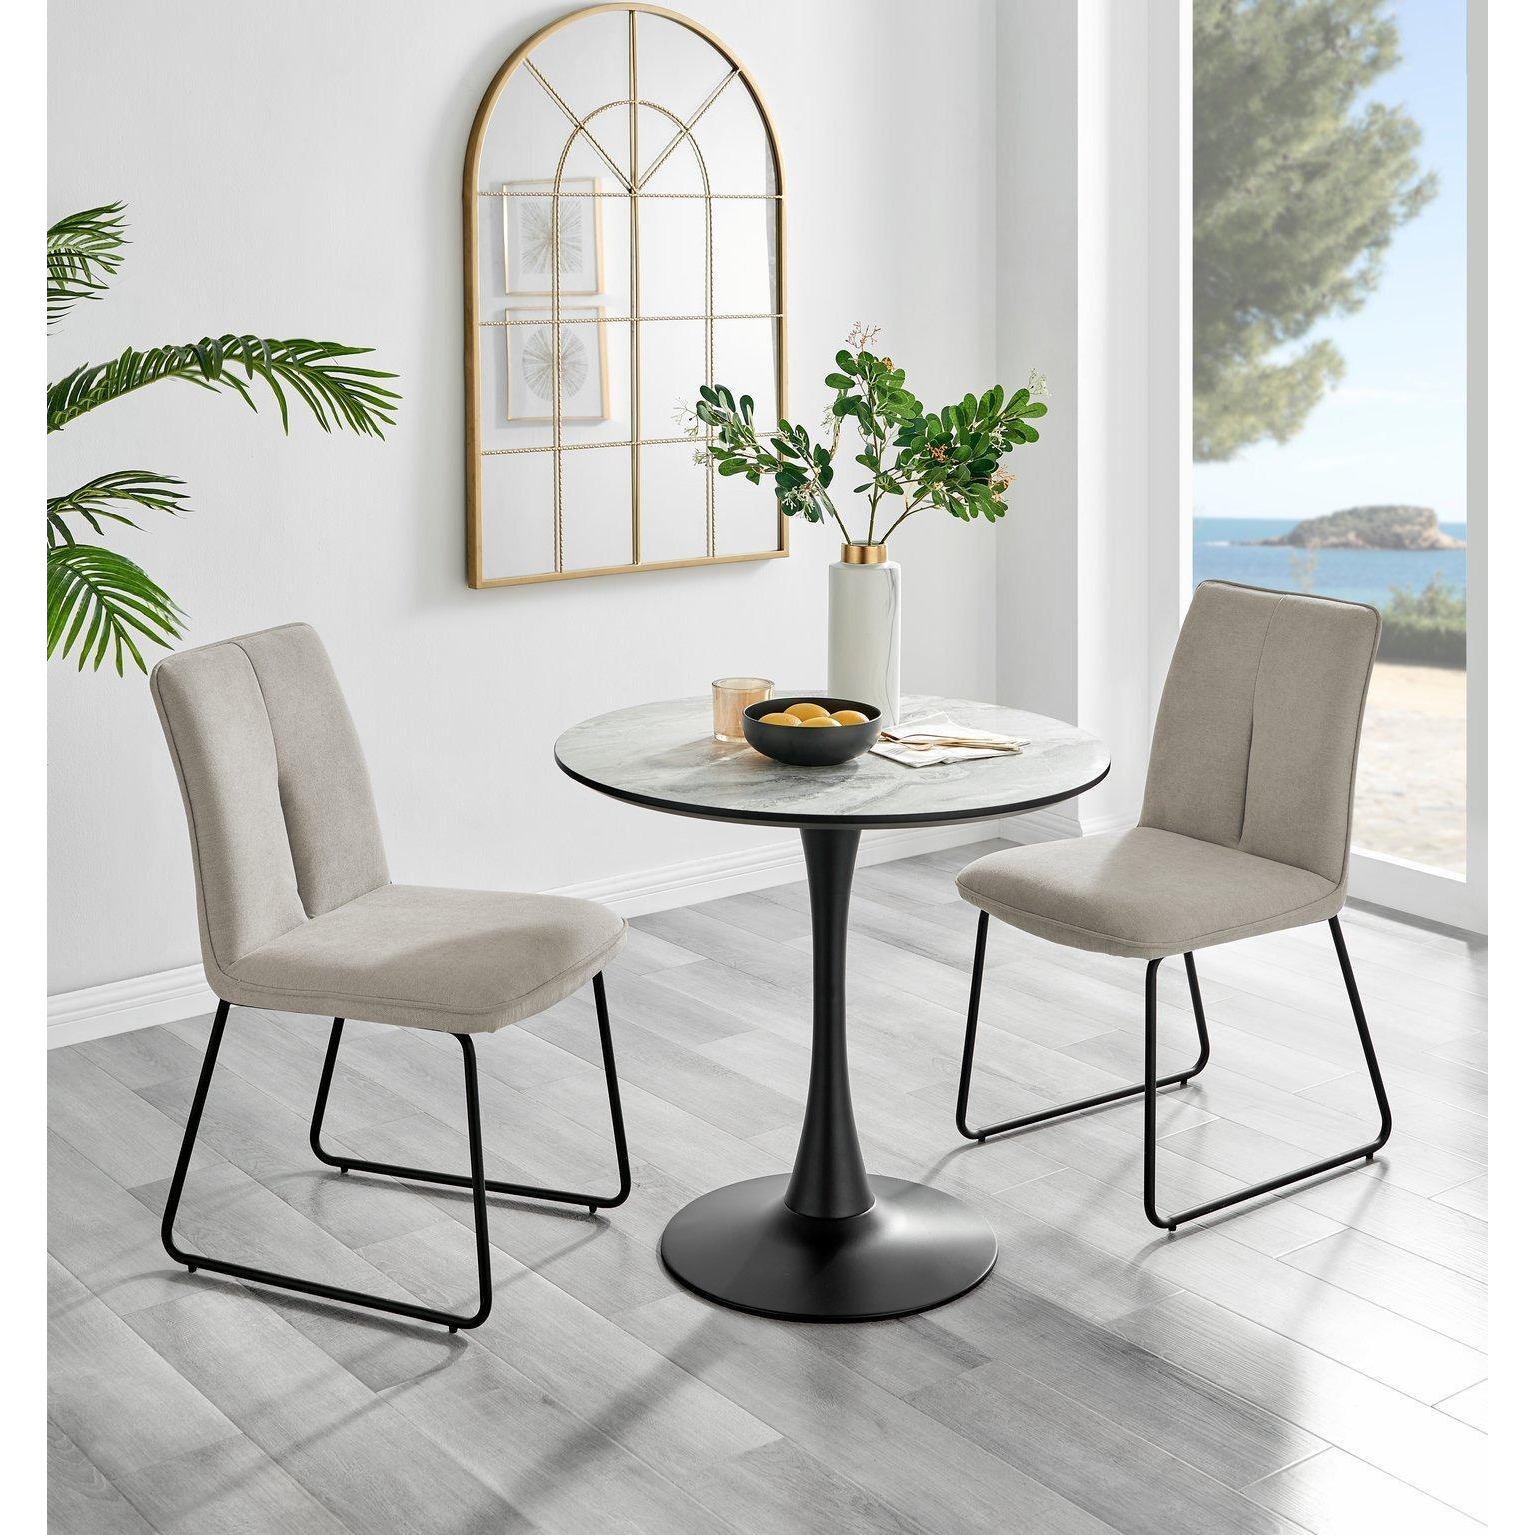 Elina White Marble Effect Scratch Resistant Dining Table & 2 Halley Fabric Chairs - image 1